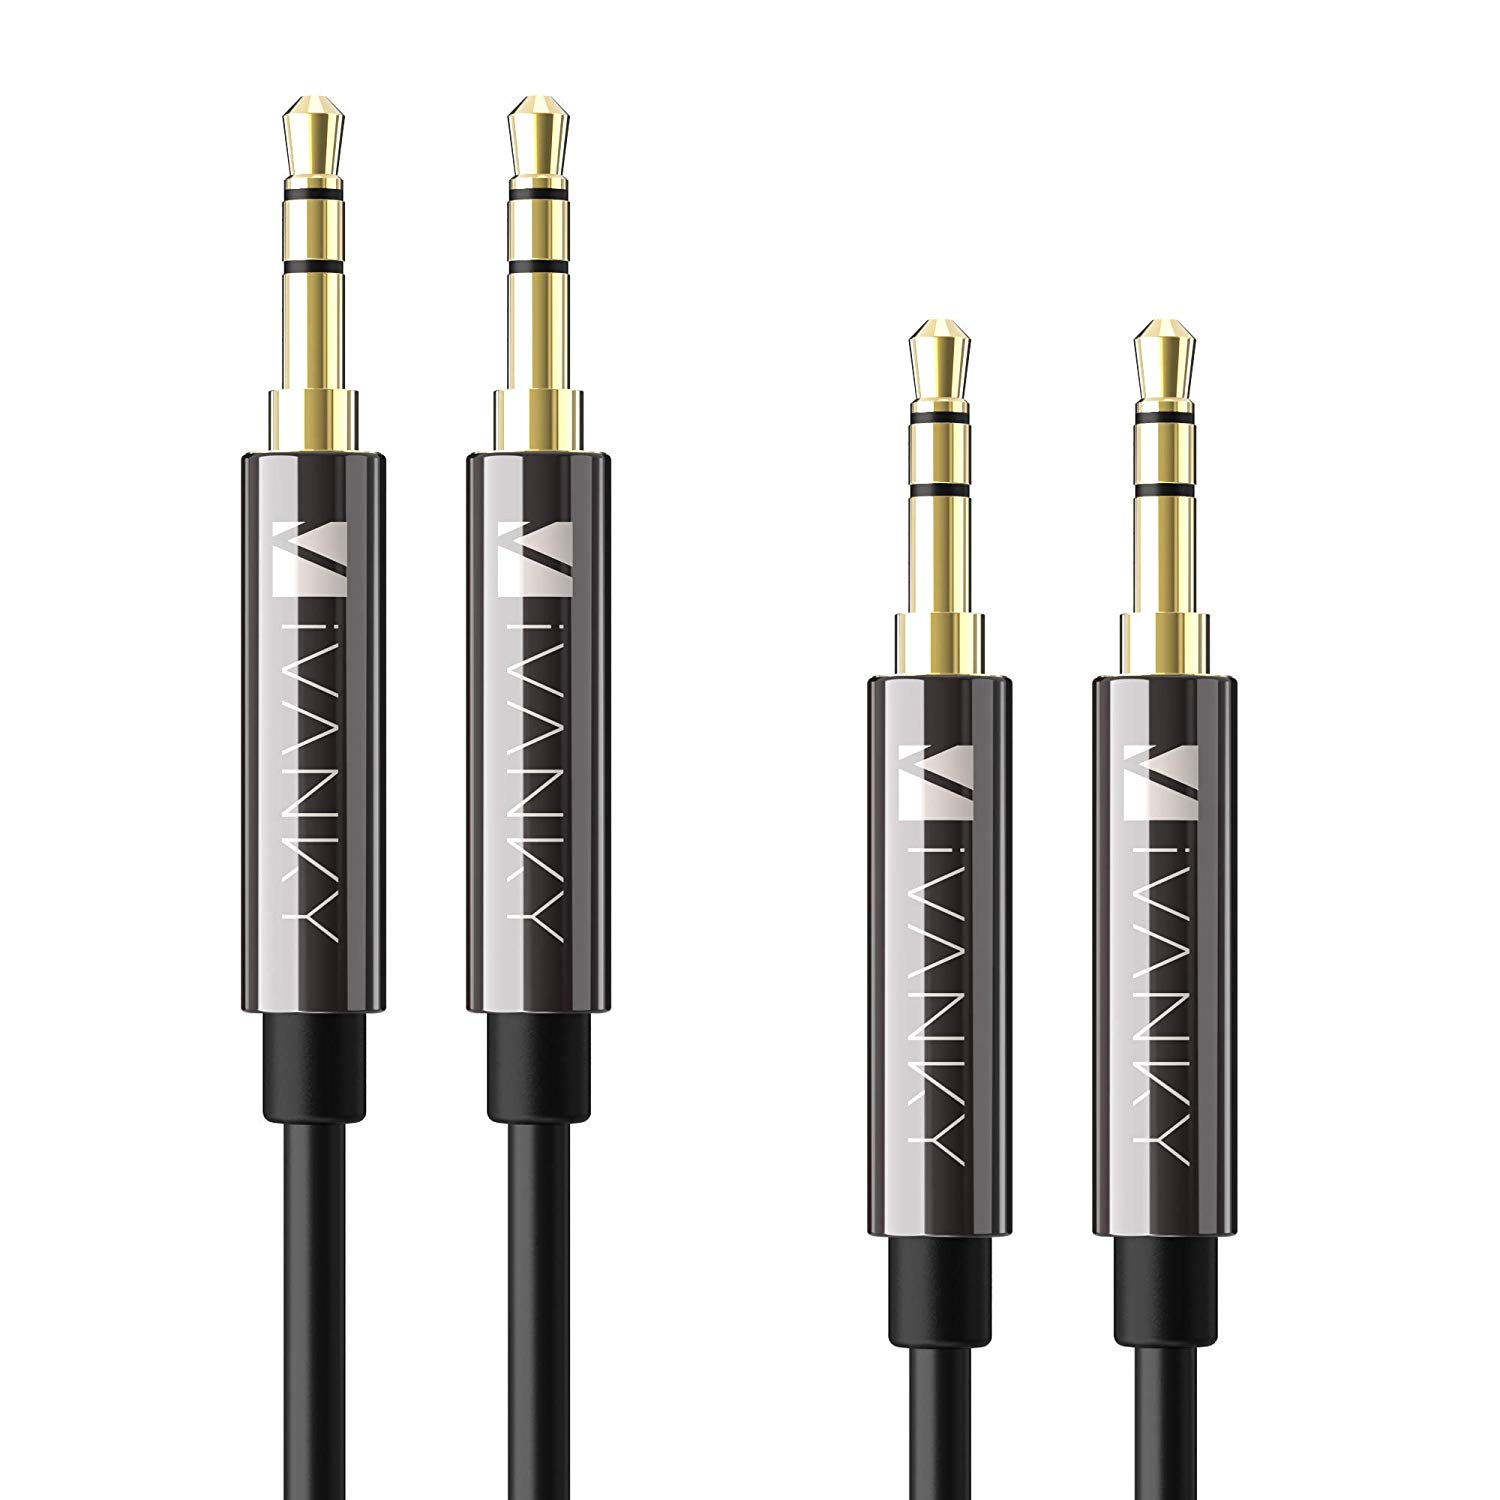 iVanky 3.5mm Male-To-Male Hi-Fi AUX Cable, 4-Feet